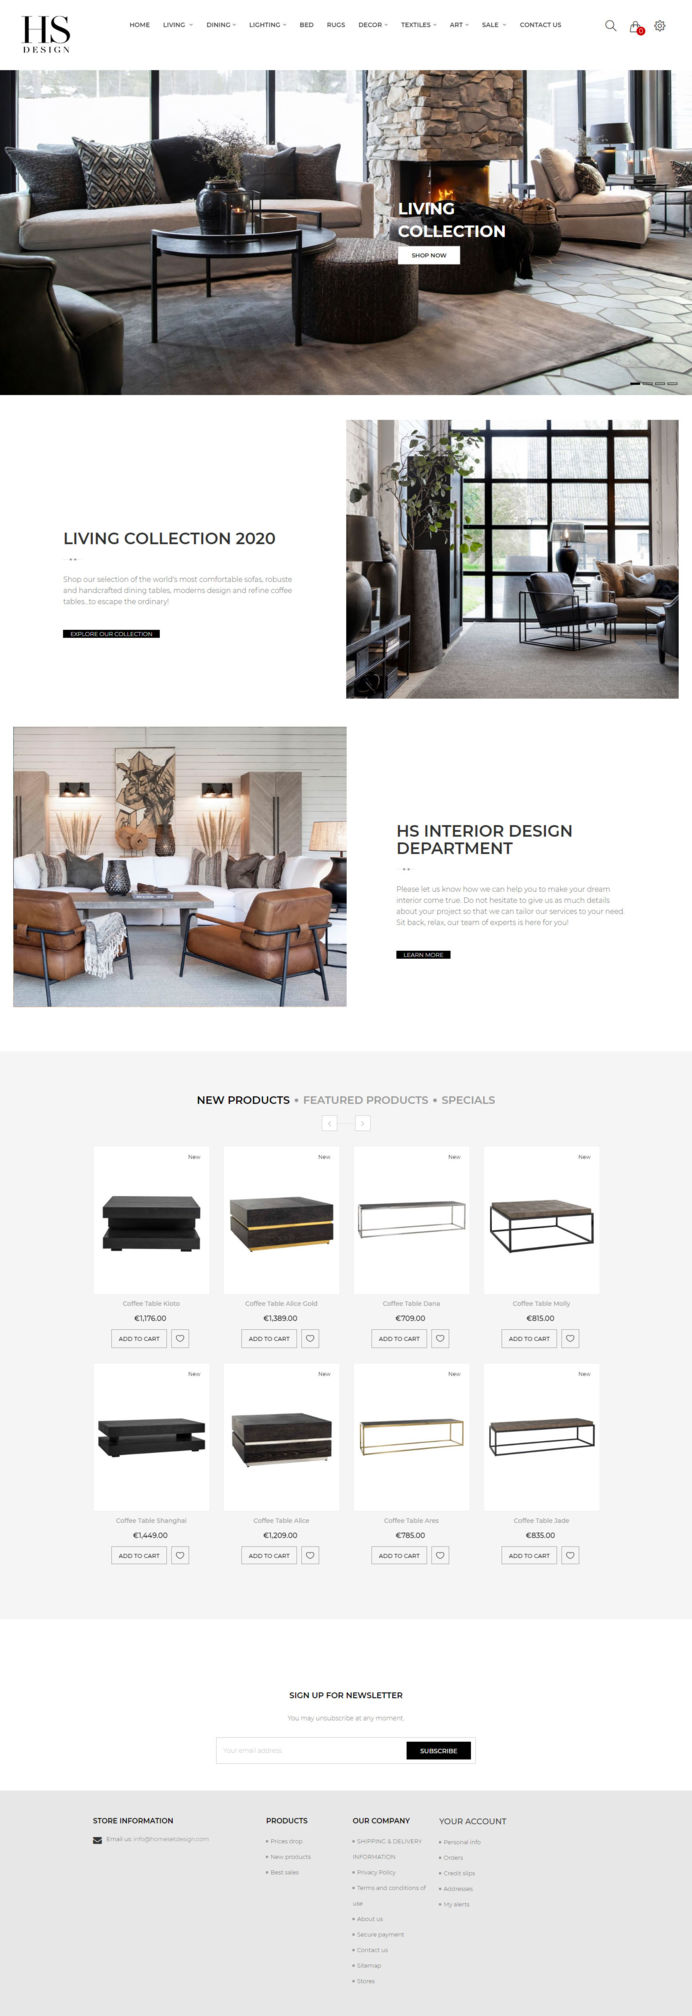 Luxury furniture online shop in Marbella developed on Prestashop 1.7 e-commerce manager and a modified premium theme